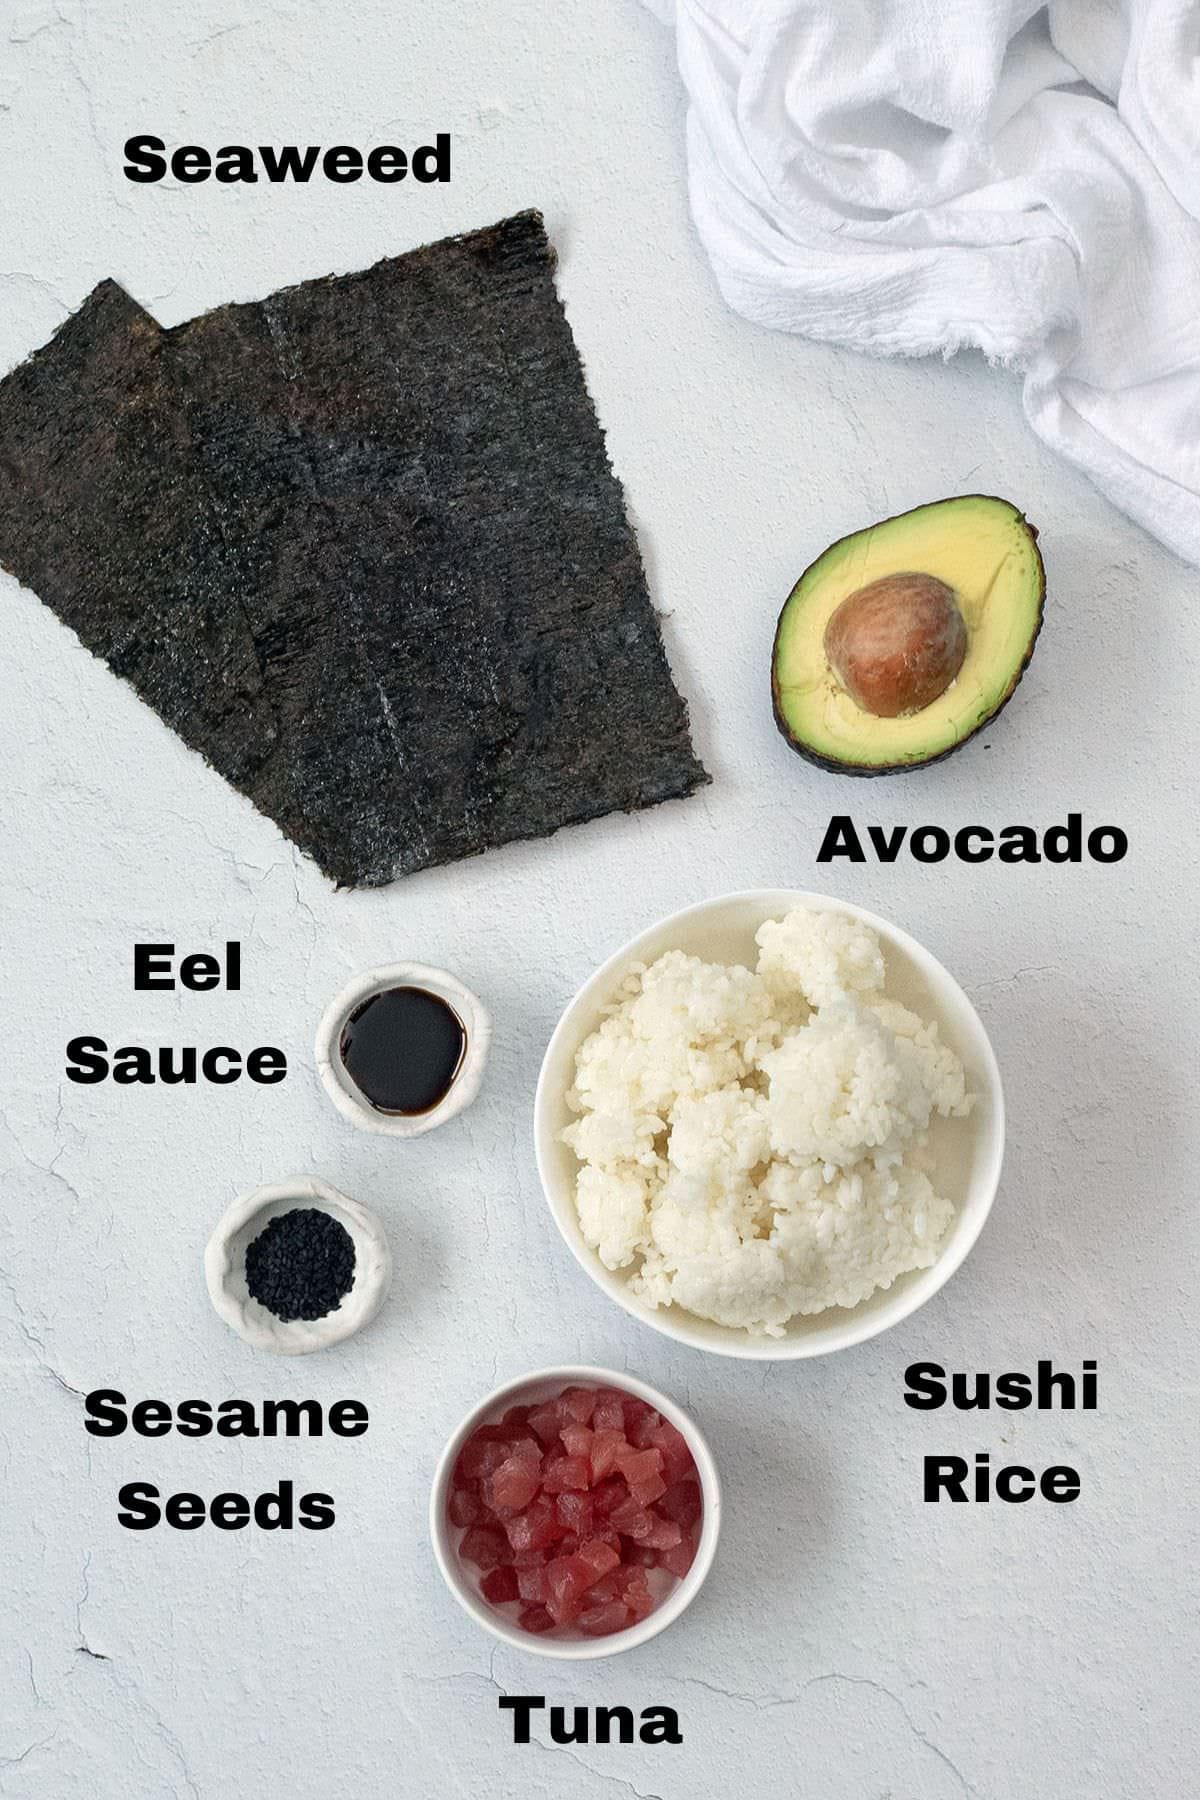 Ingredients for tuna rolls.